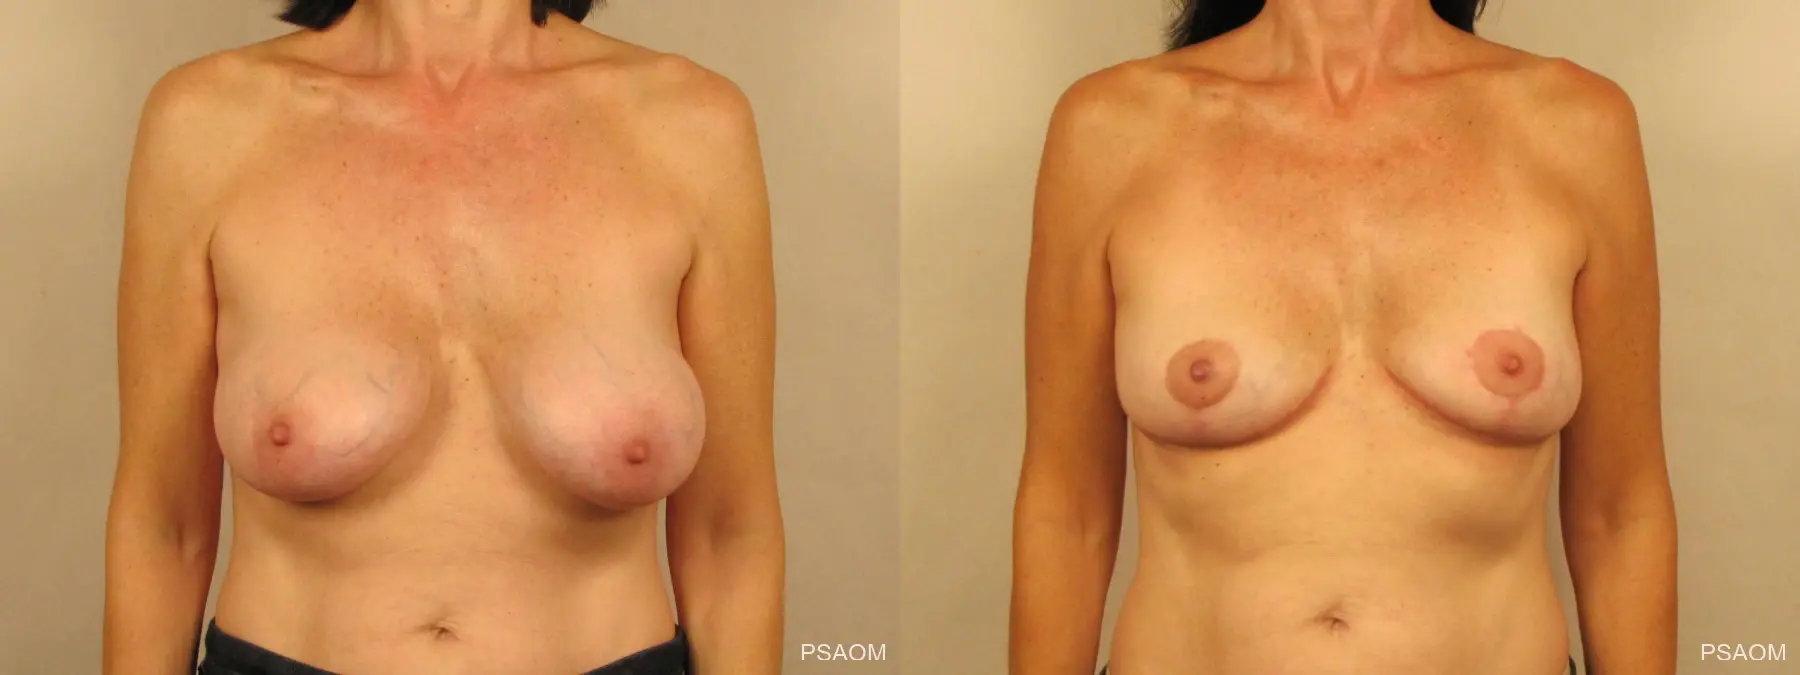 Breast Implant Removal With Lift: Patient 1 - Before and After 1